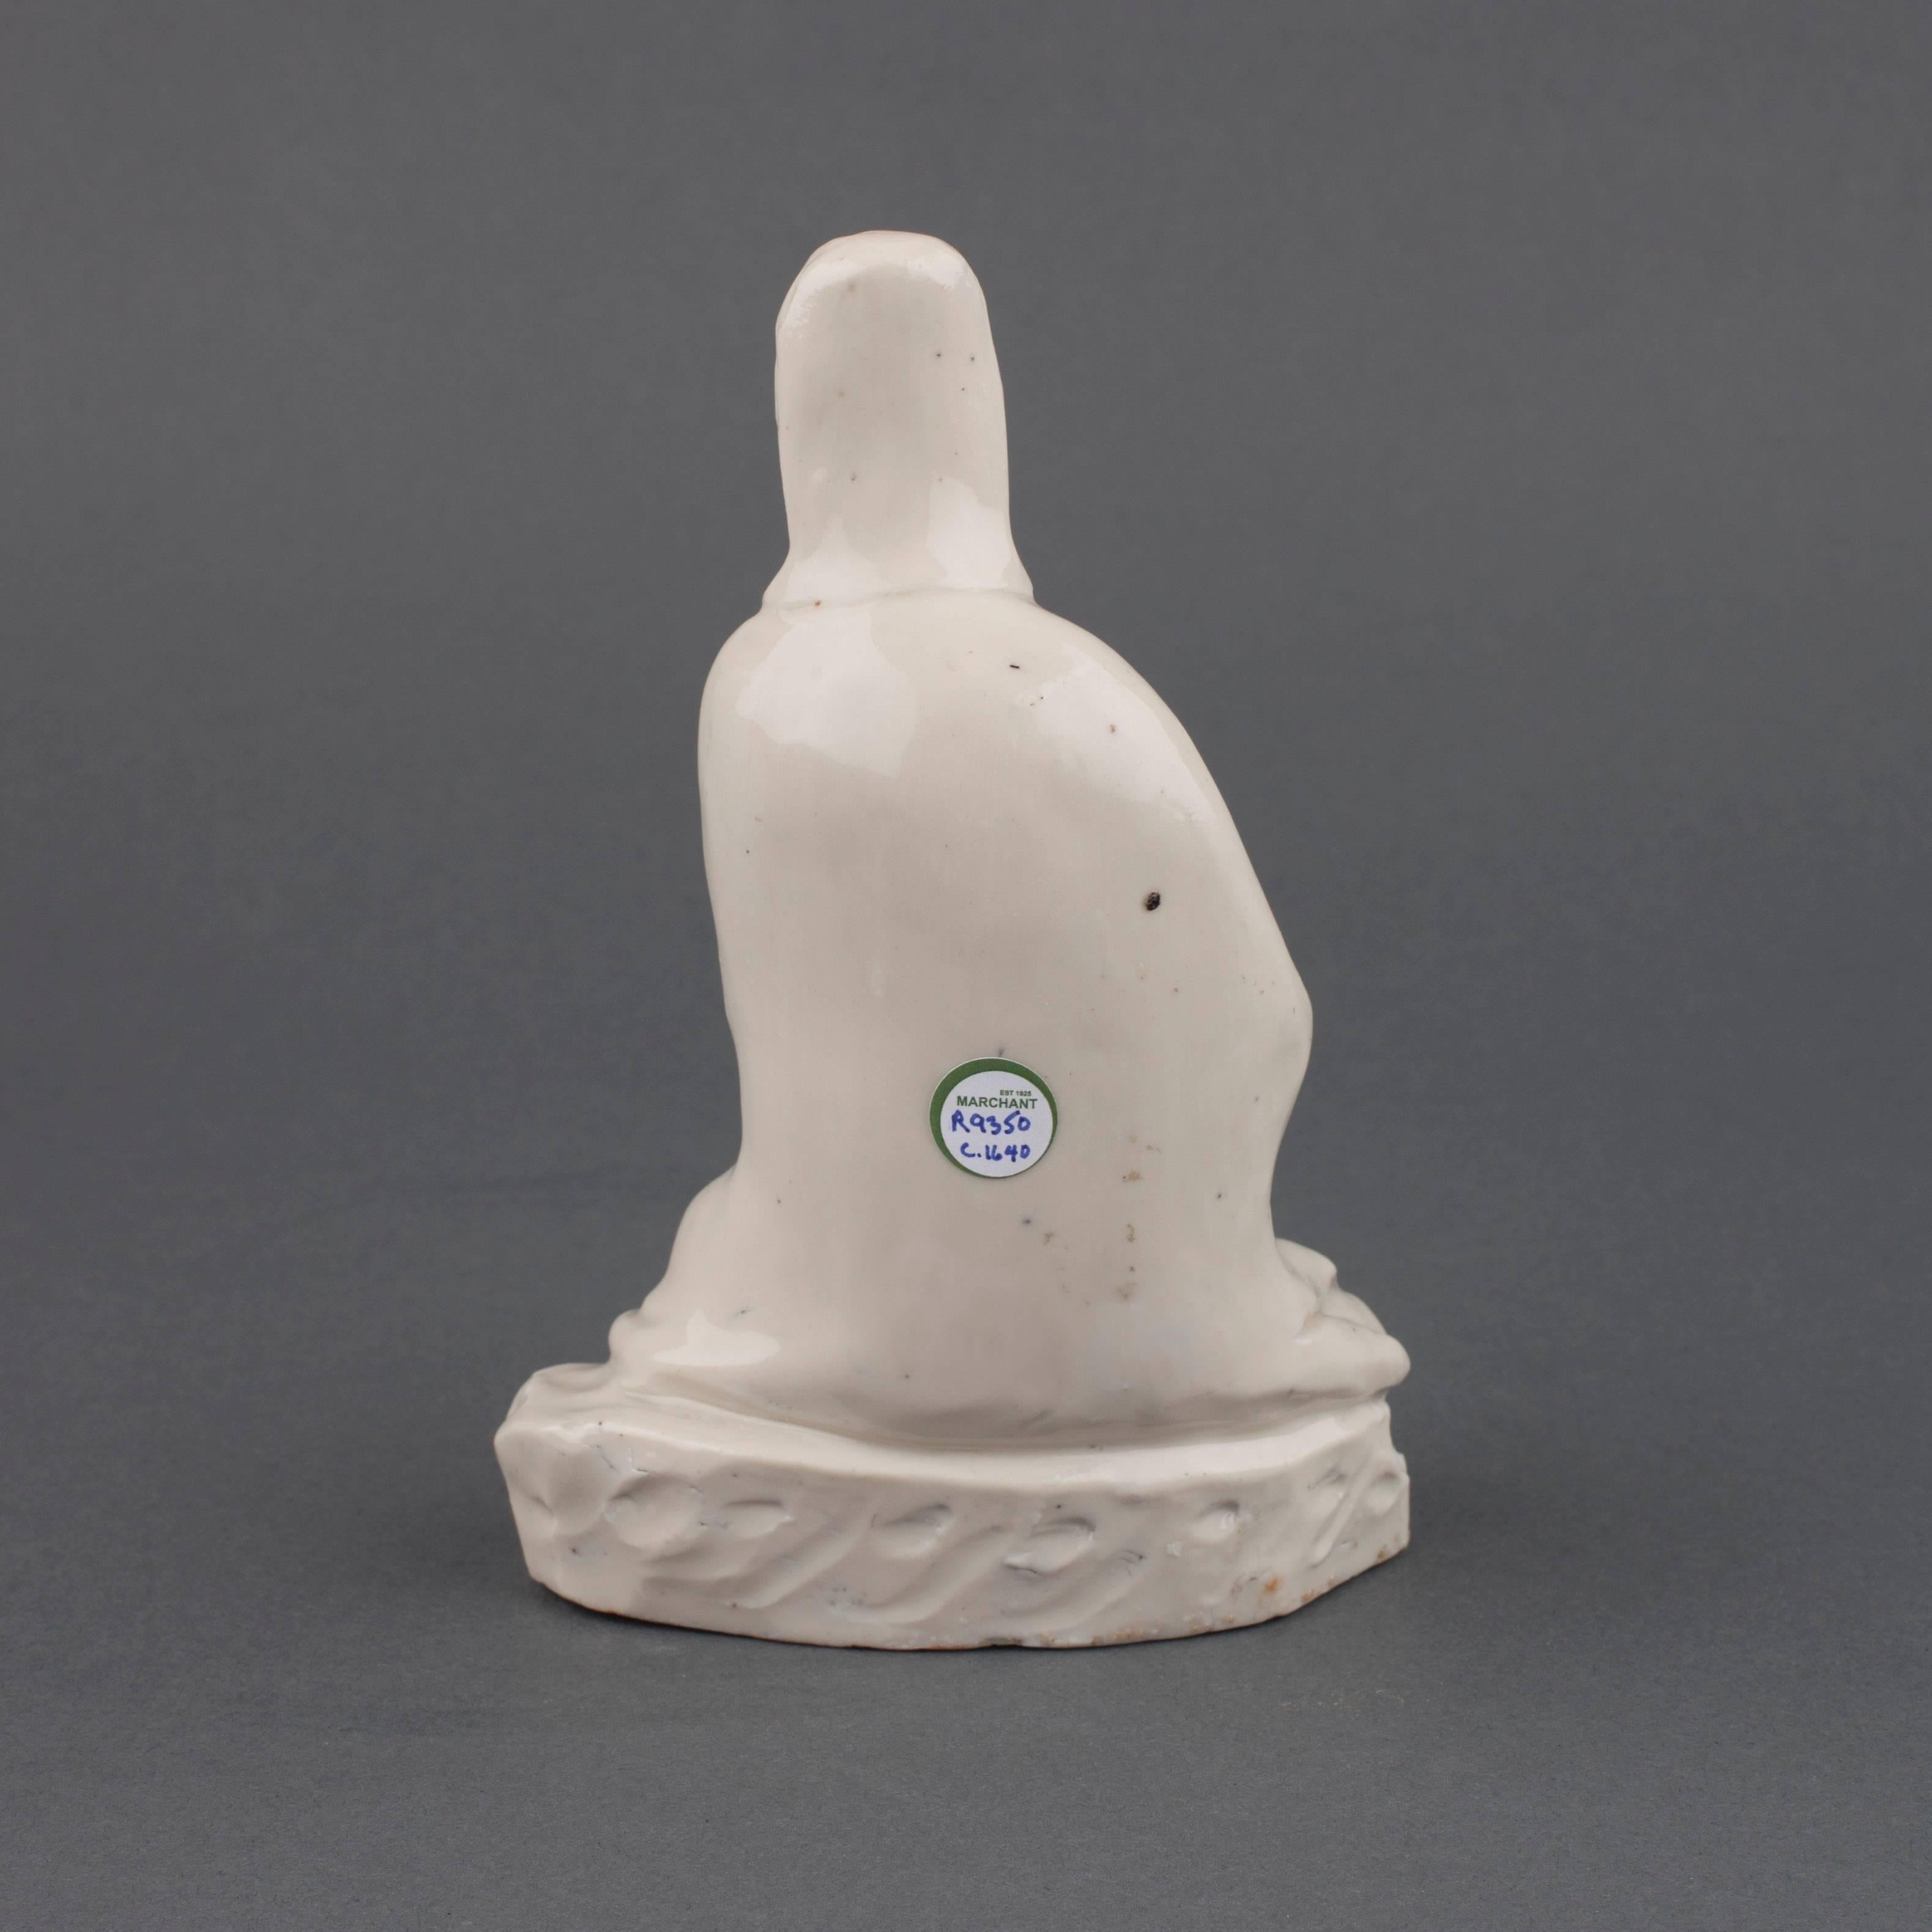 A Chinese Blanc de Chine porcelain figure of a seated Guanyin, her hands together resting on her right raised knee, she wears long flowing robes with tall cowl revealing her high-piled hair, all on a rock work base,

circa 1640.

Measures: 15cm